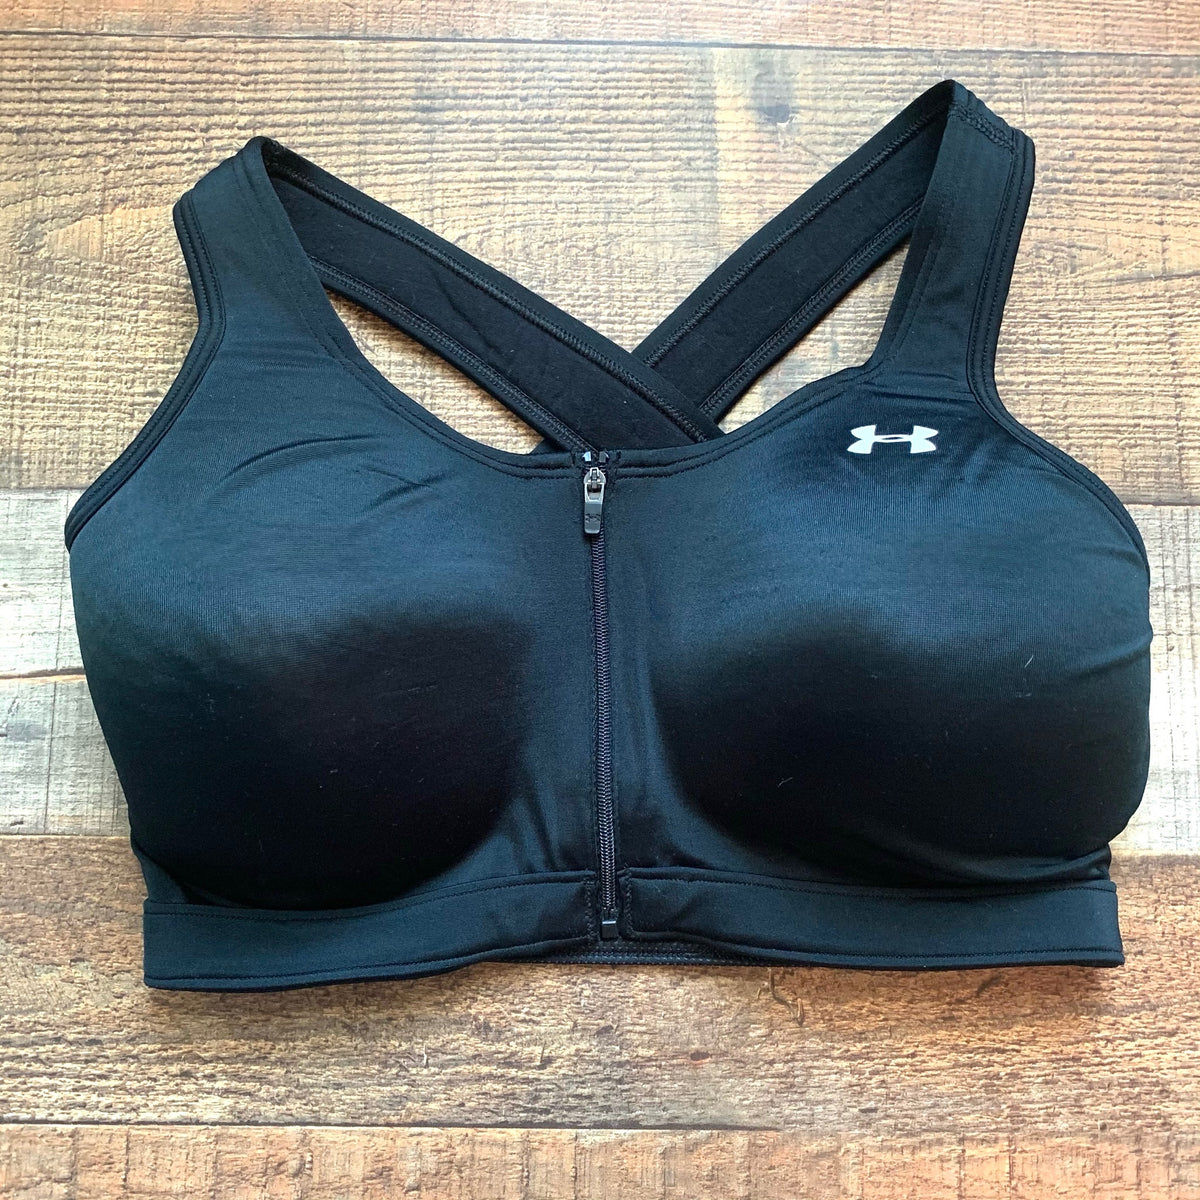 Under Armour Black Zip Front Racer Back Sports Bra- MD 34:36